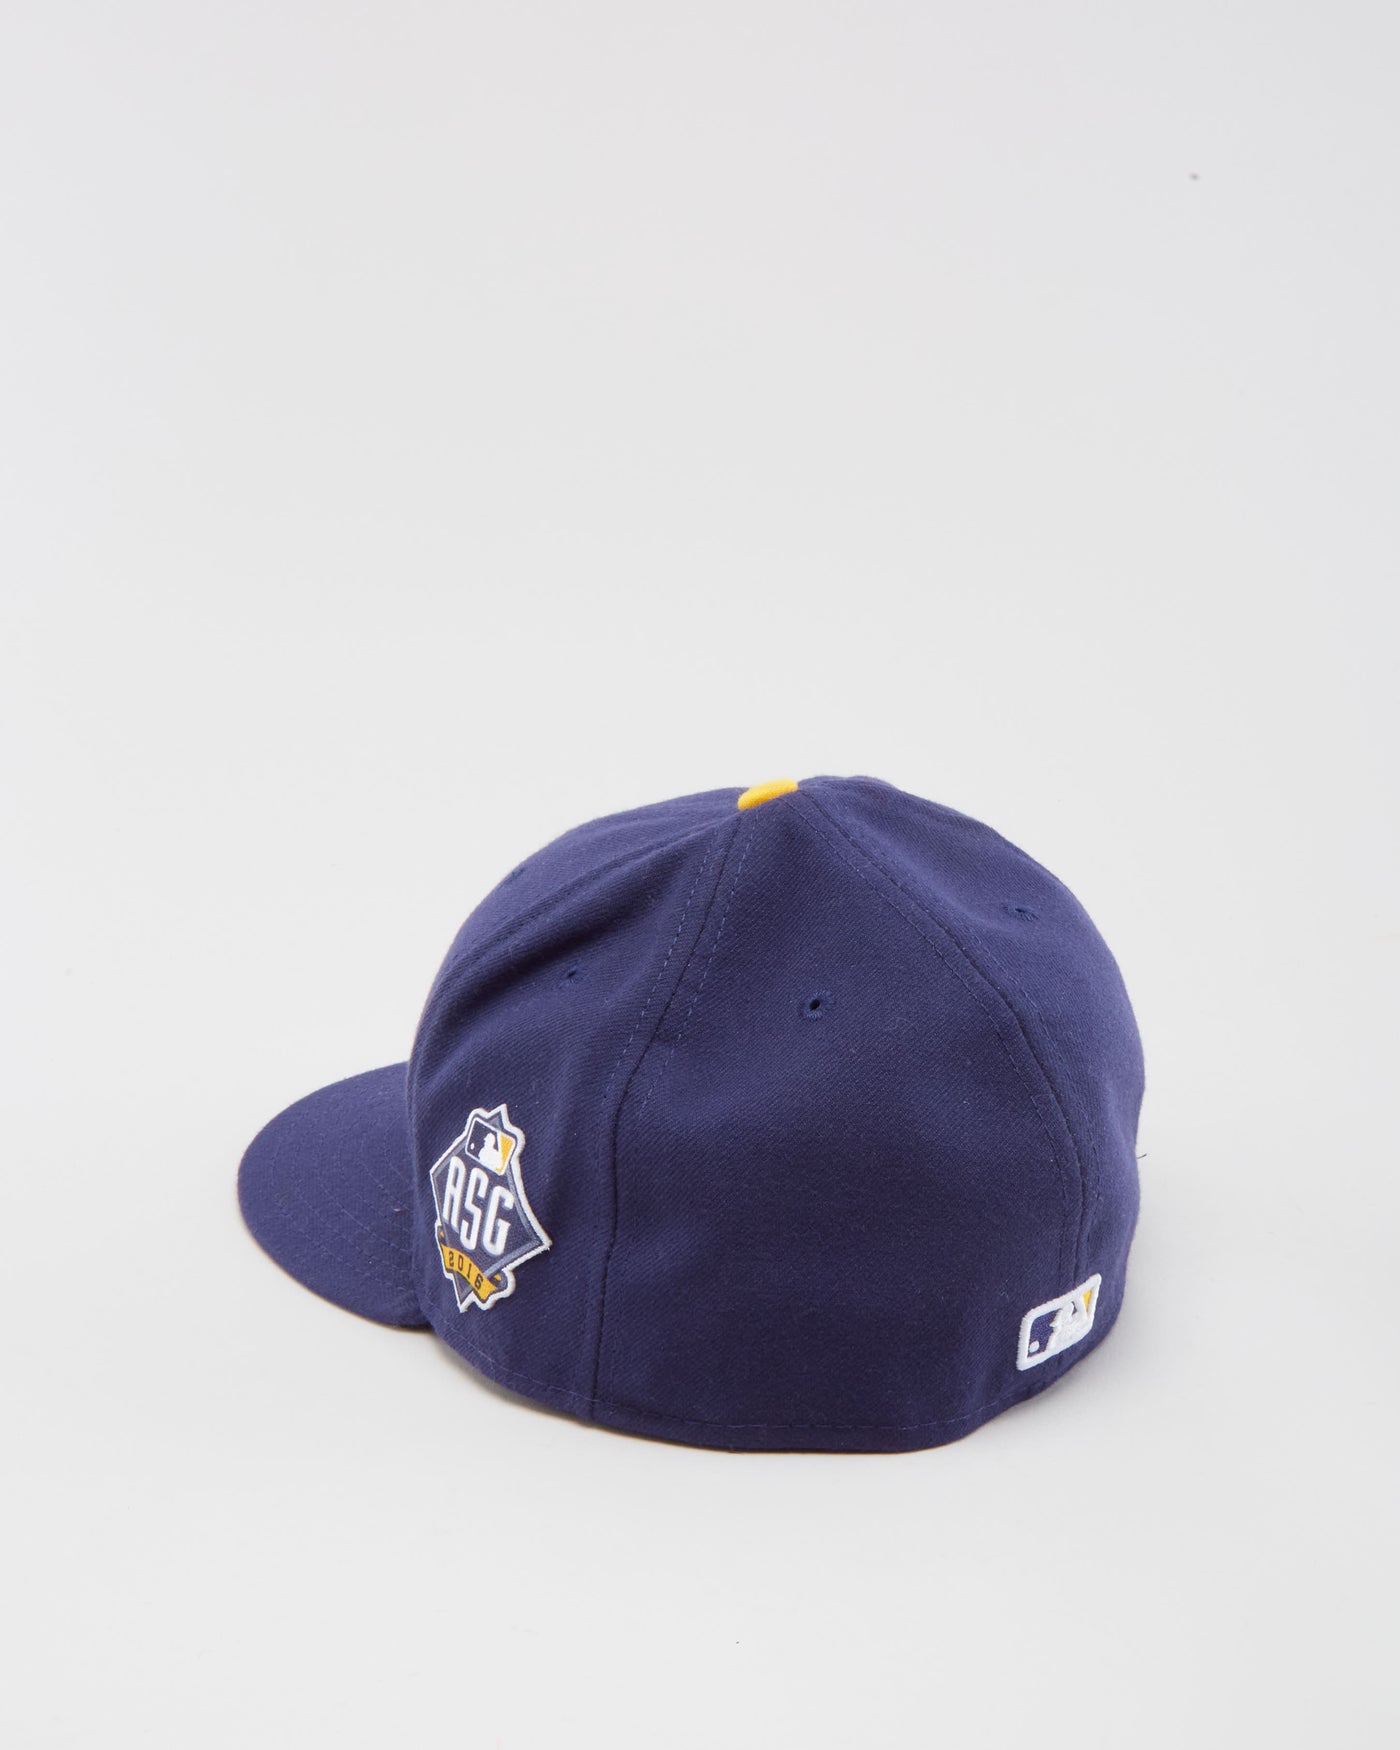 2016 ASG San Diego MLB New Era Navy Fitted Cap